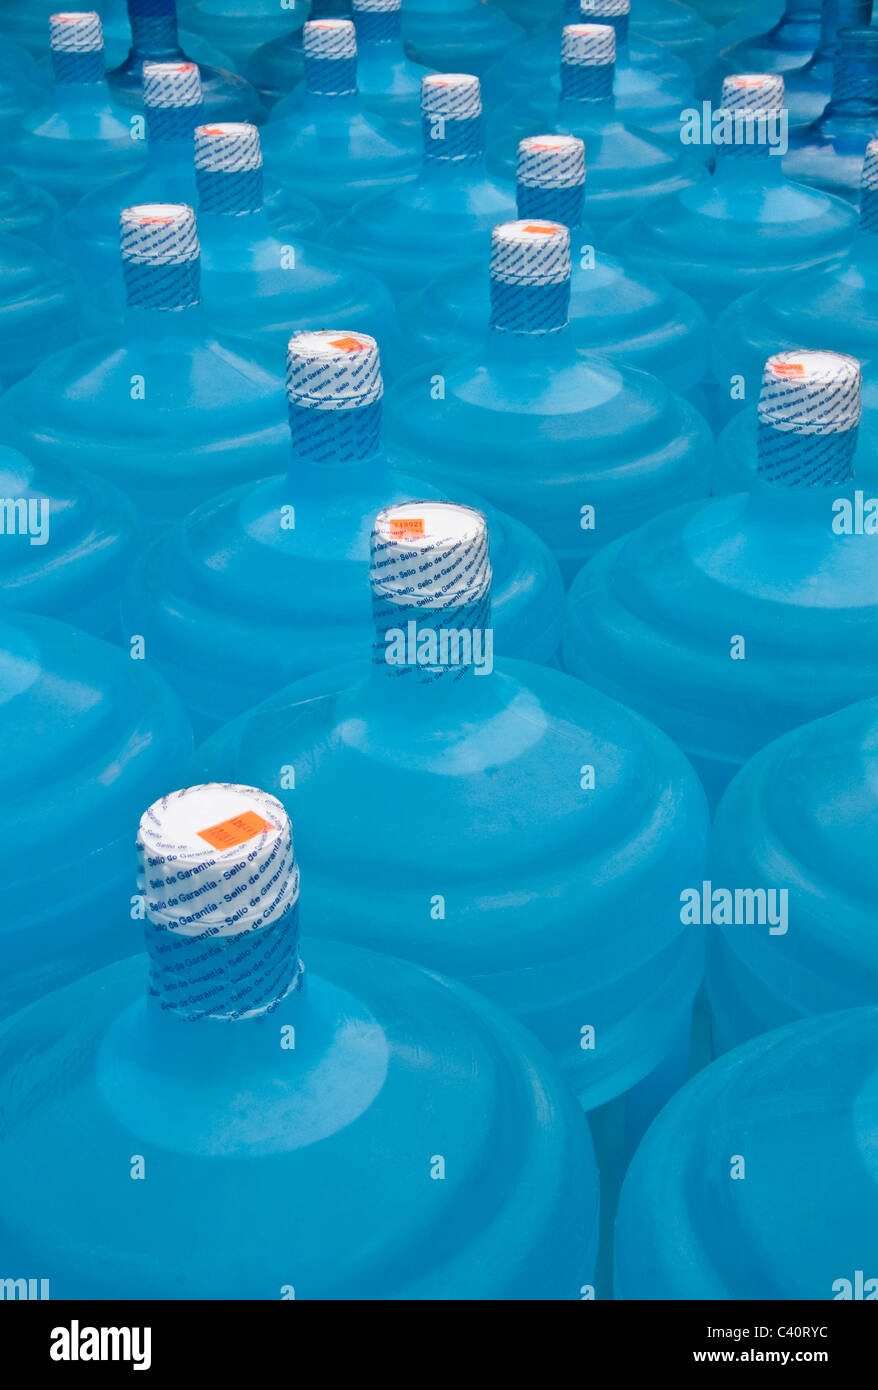 Jugs of drinking water in Central America with guarantee/warranty seals (sealed for protection) Stock Photo